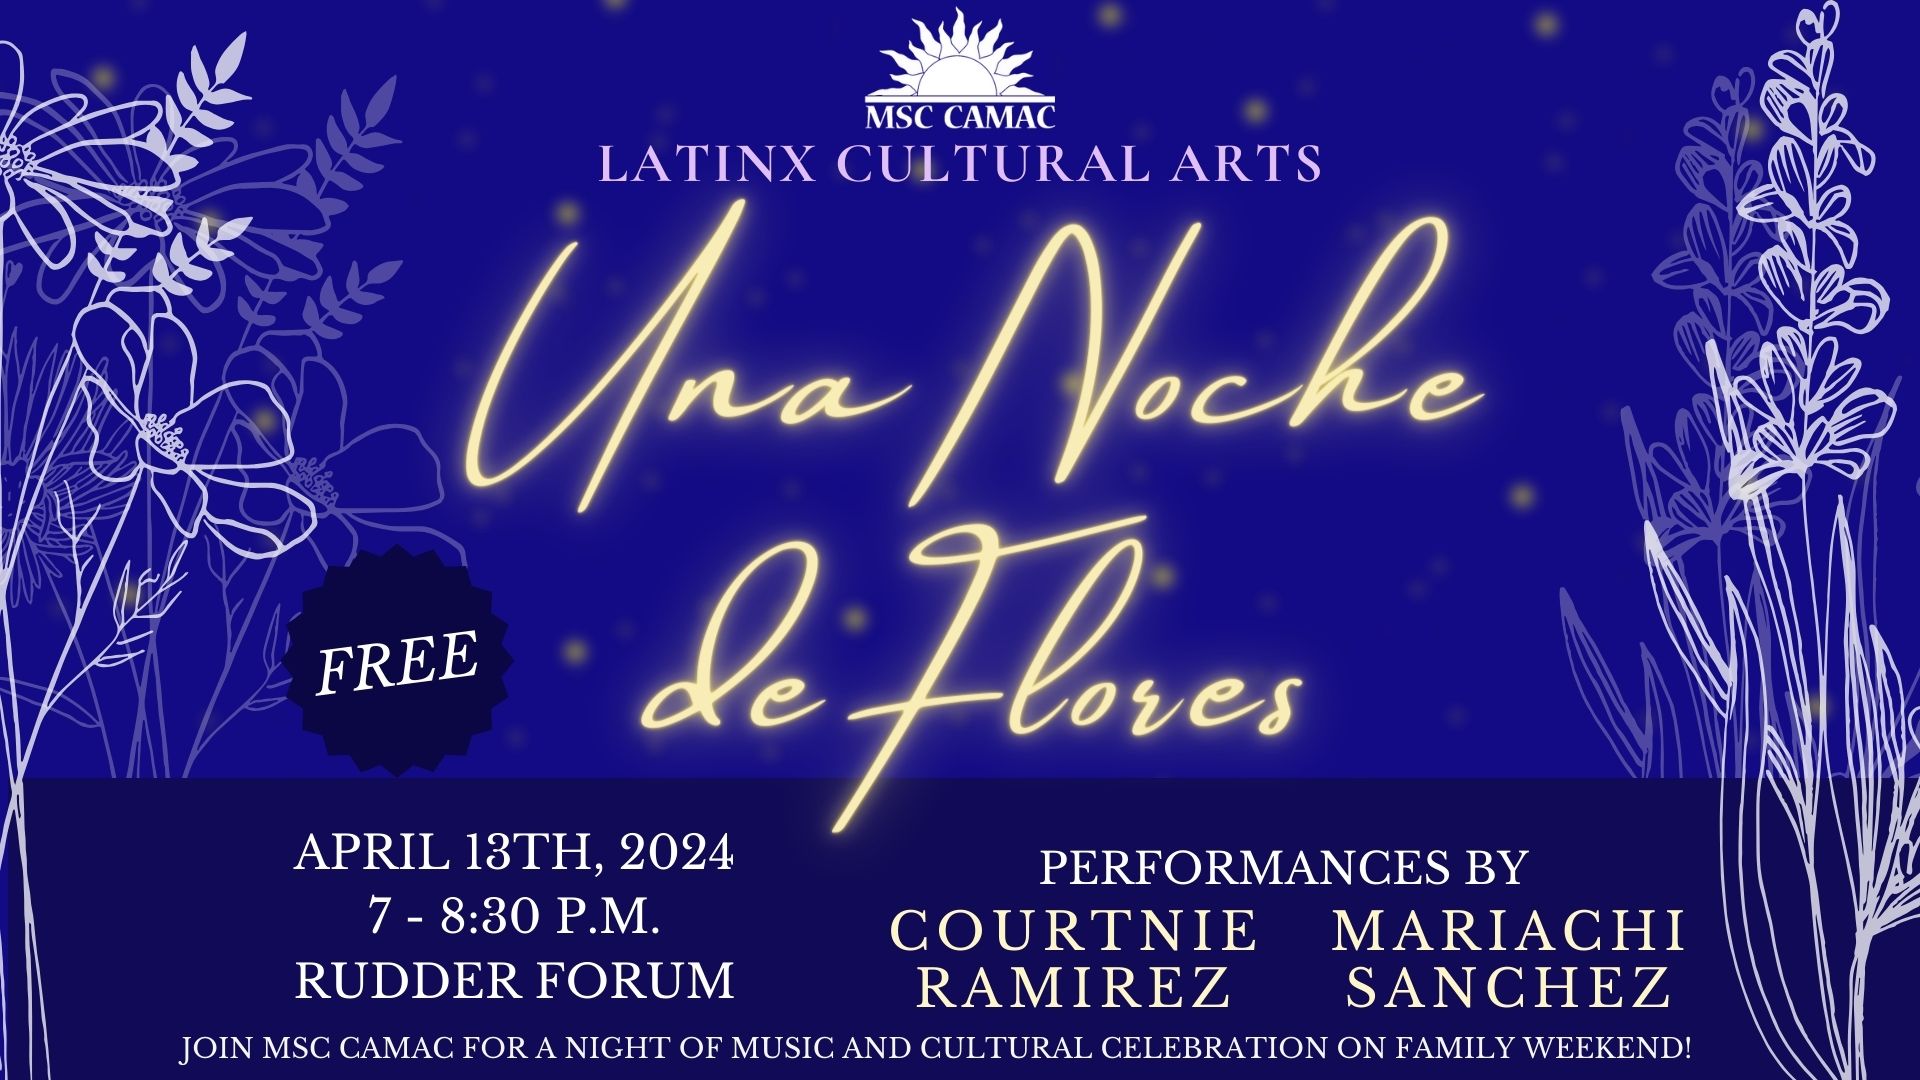 MSC CAMAC Latinx Cultural Arts presents Una Noche de Flores. Join MSC CAMAC for a night of music and cultural celebration on family weekend. Perfomances by Courtnie Ramirez and Mariachi Sanchez. April 13th, 2024 from 7 to 8:30 p.m. at Rudder Forum. Free admission